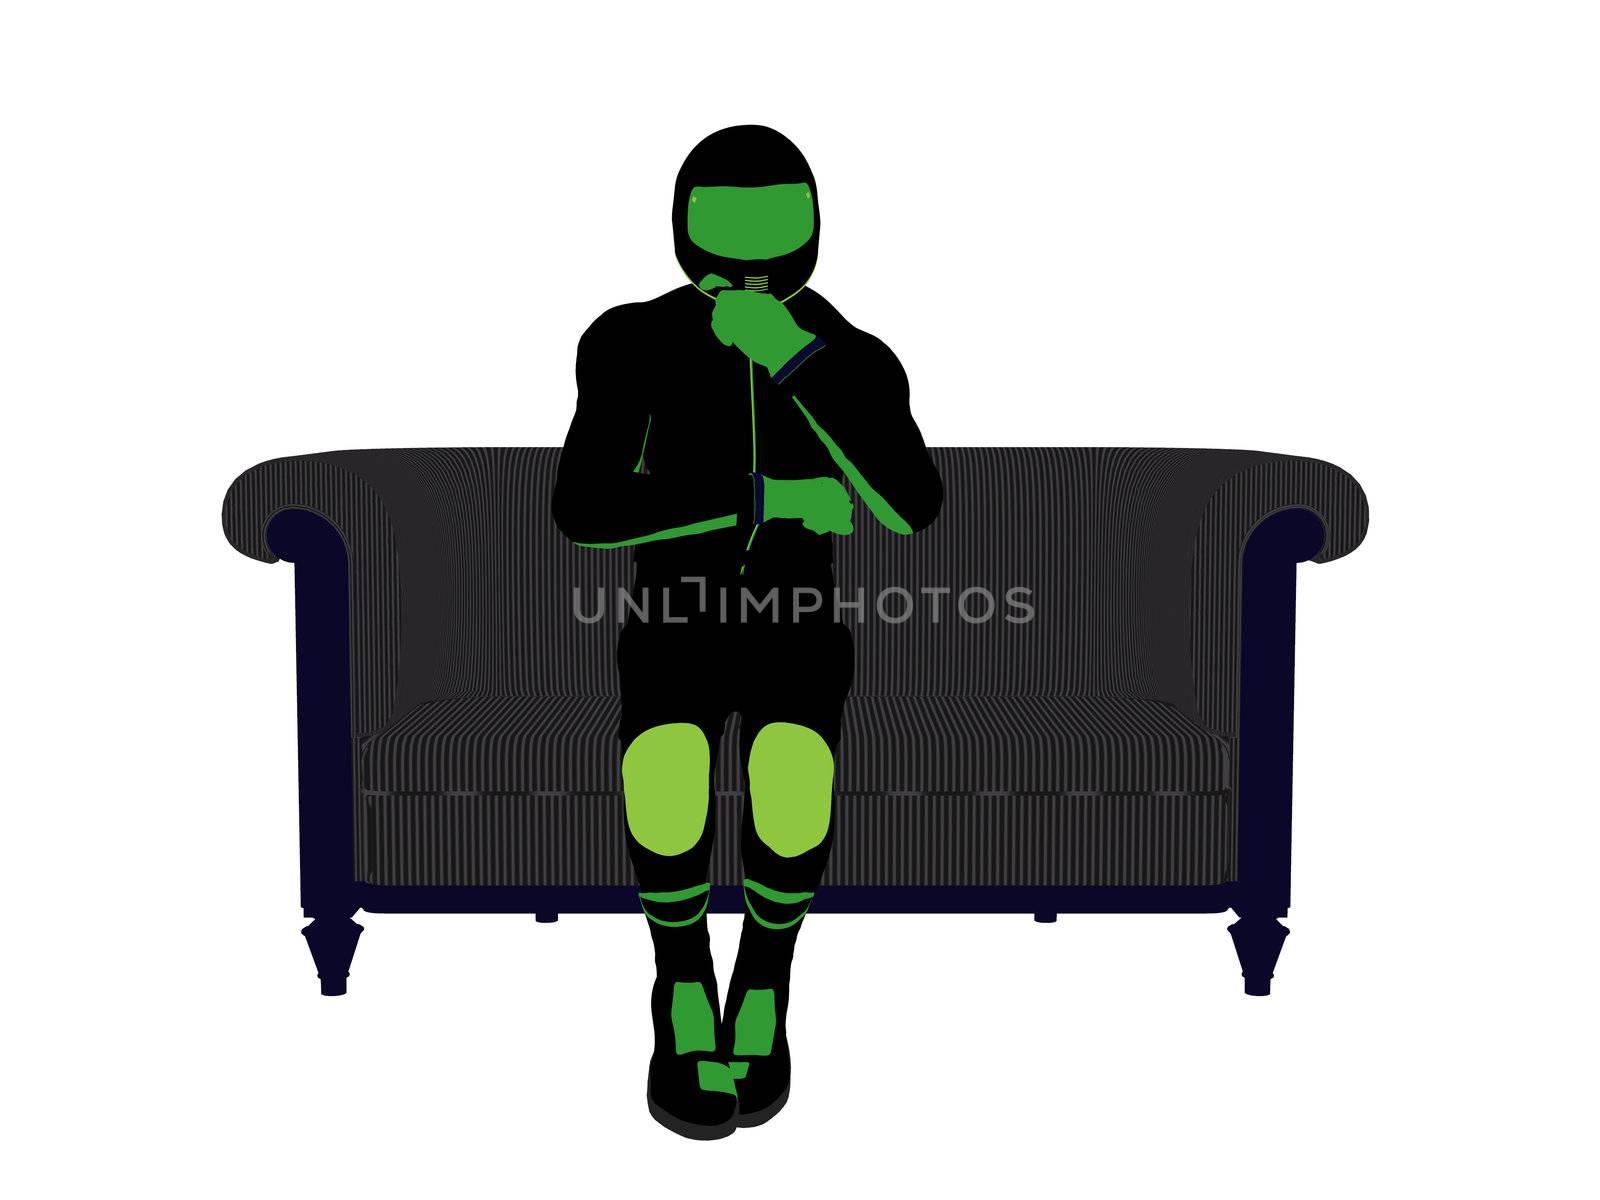 Male Motorcycle Rider sitting on a sofa Silhouette by kathygold